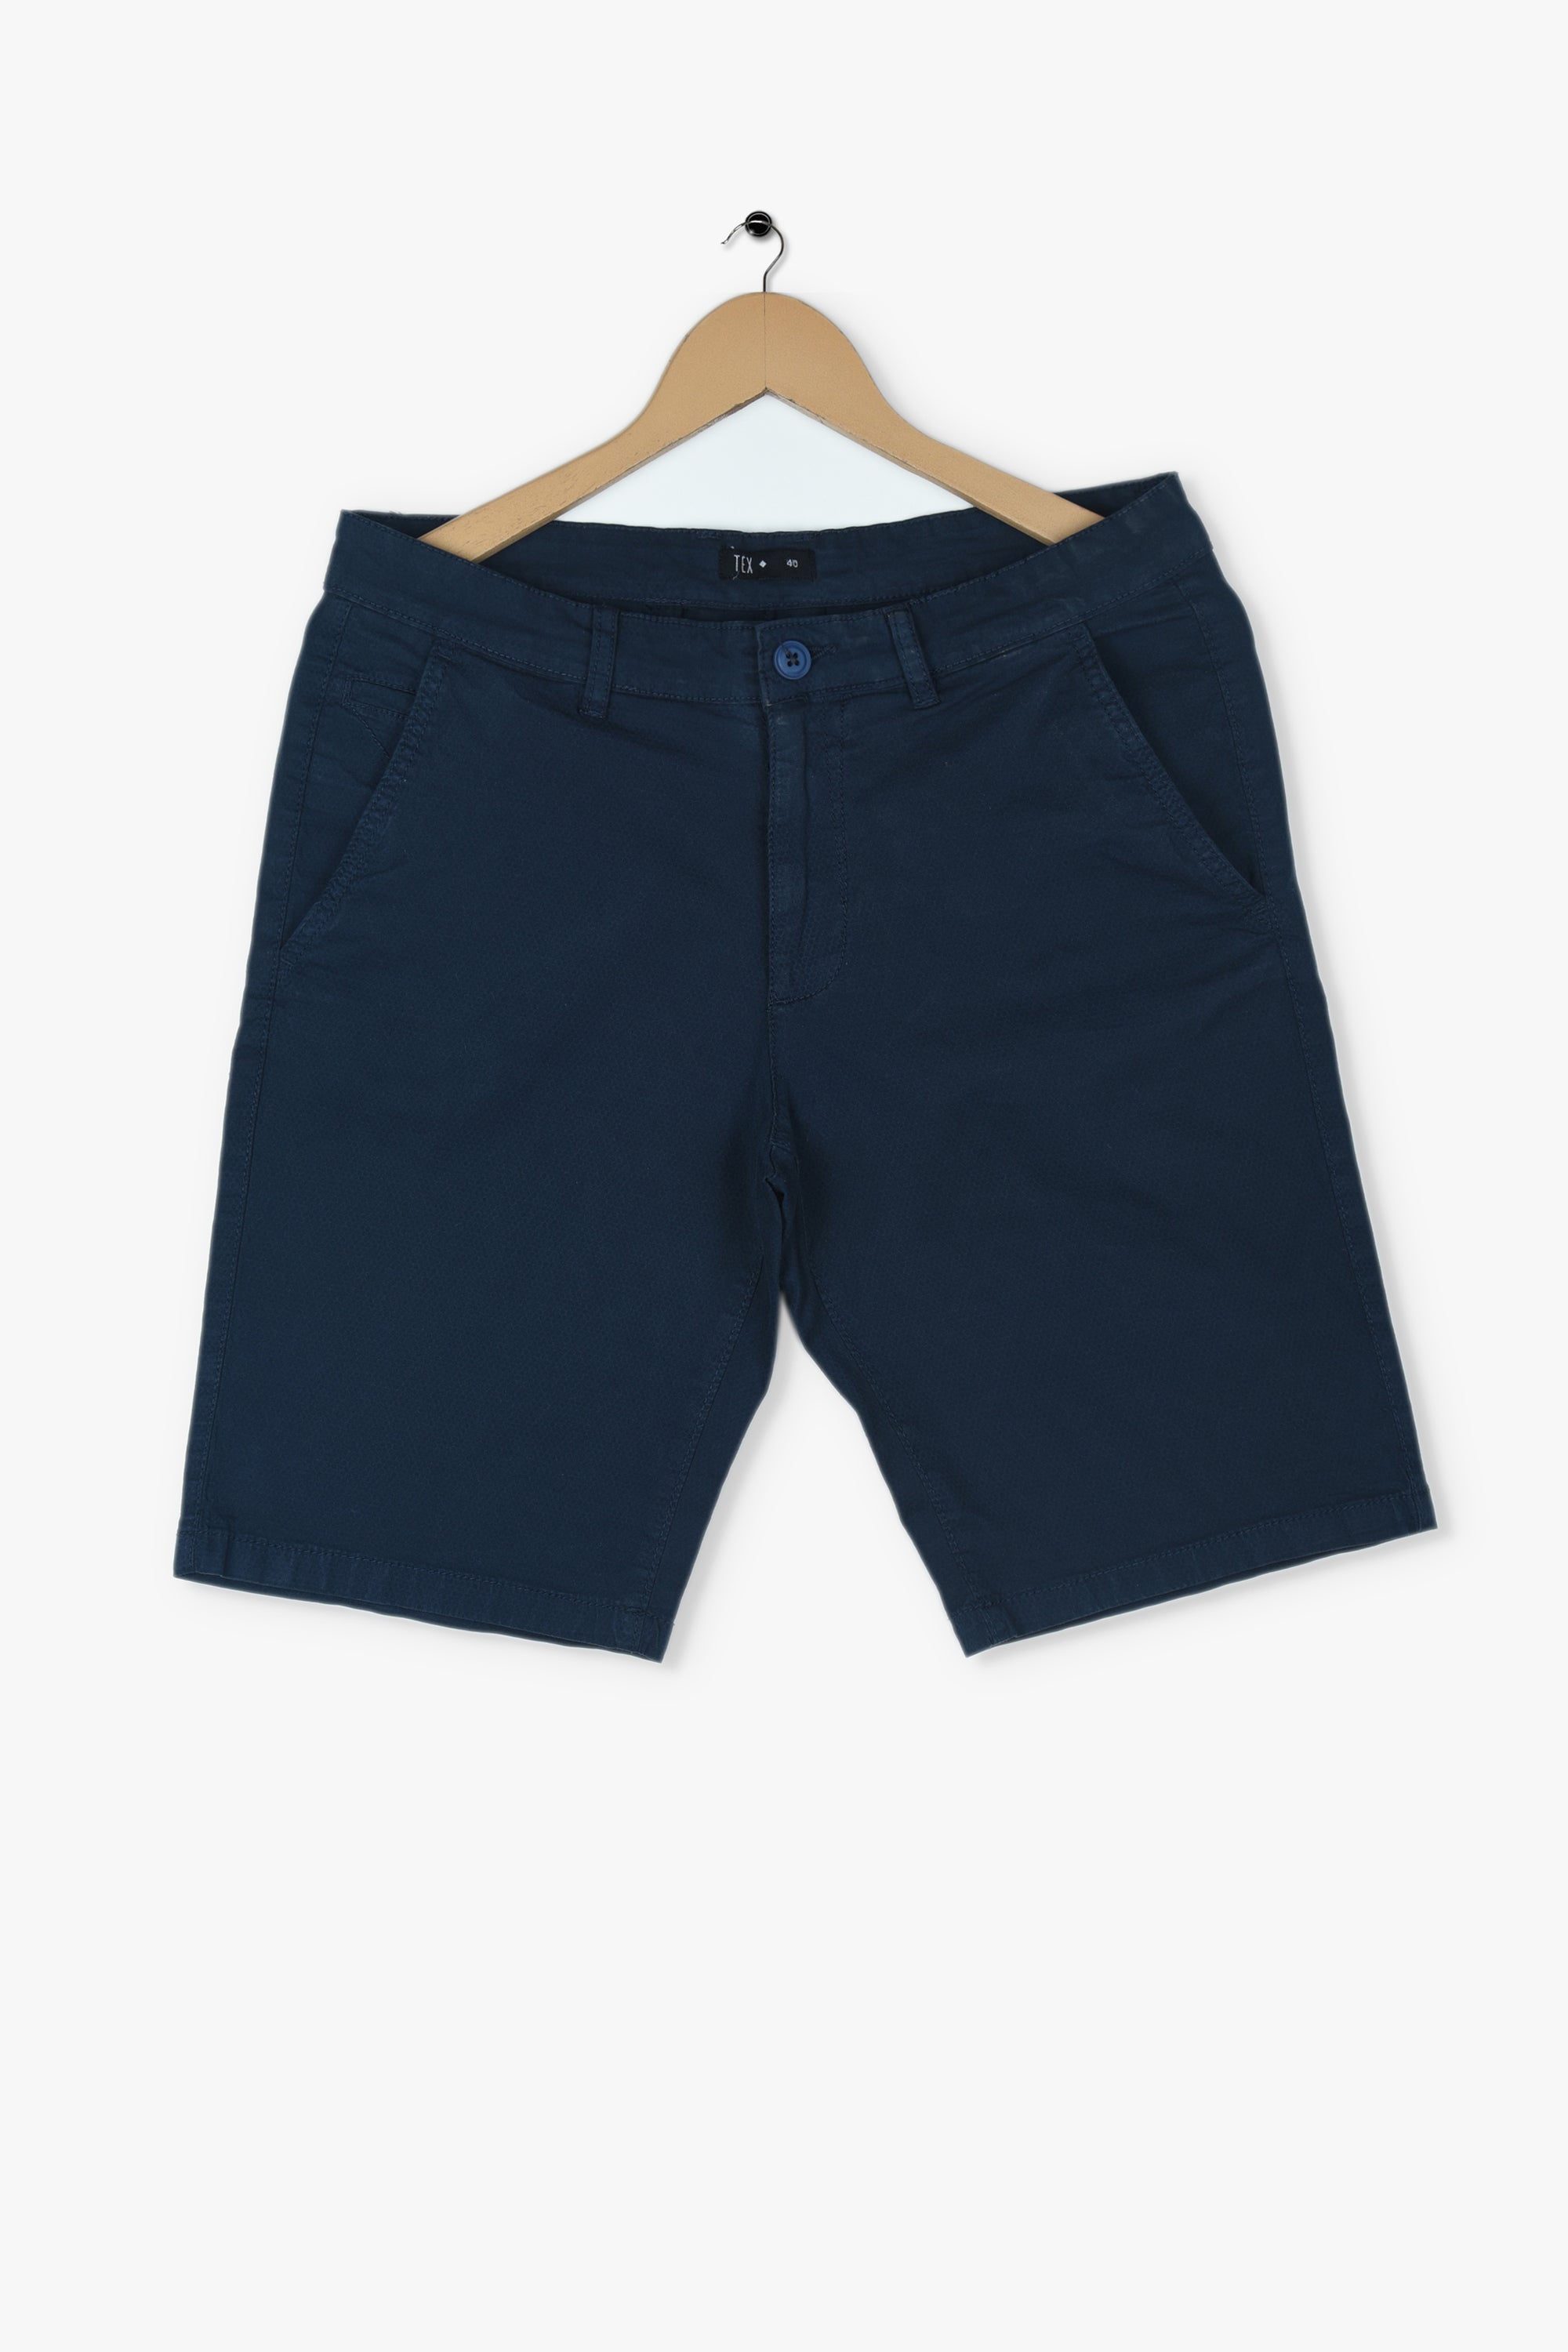 TEXTURED WEAVE SMART FIT CHINO Shorts